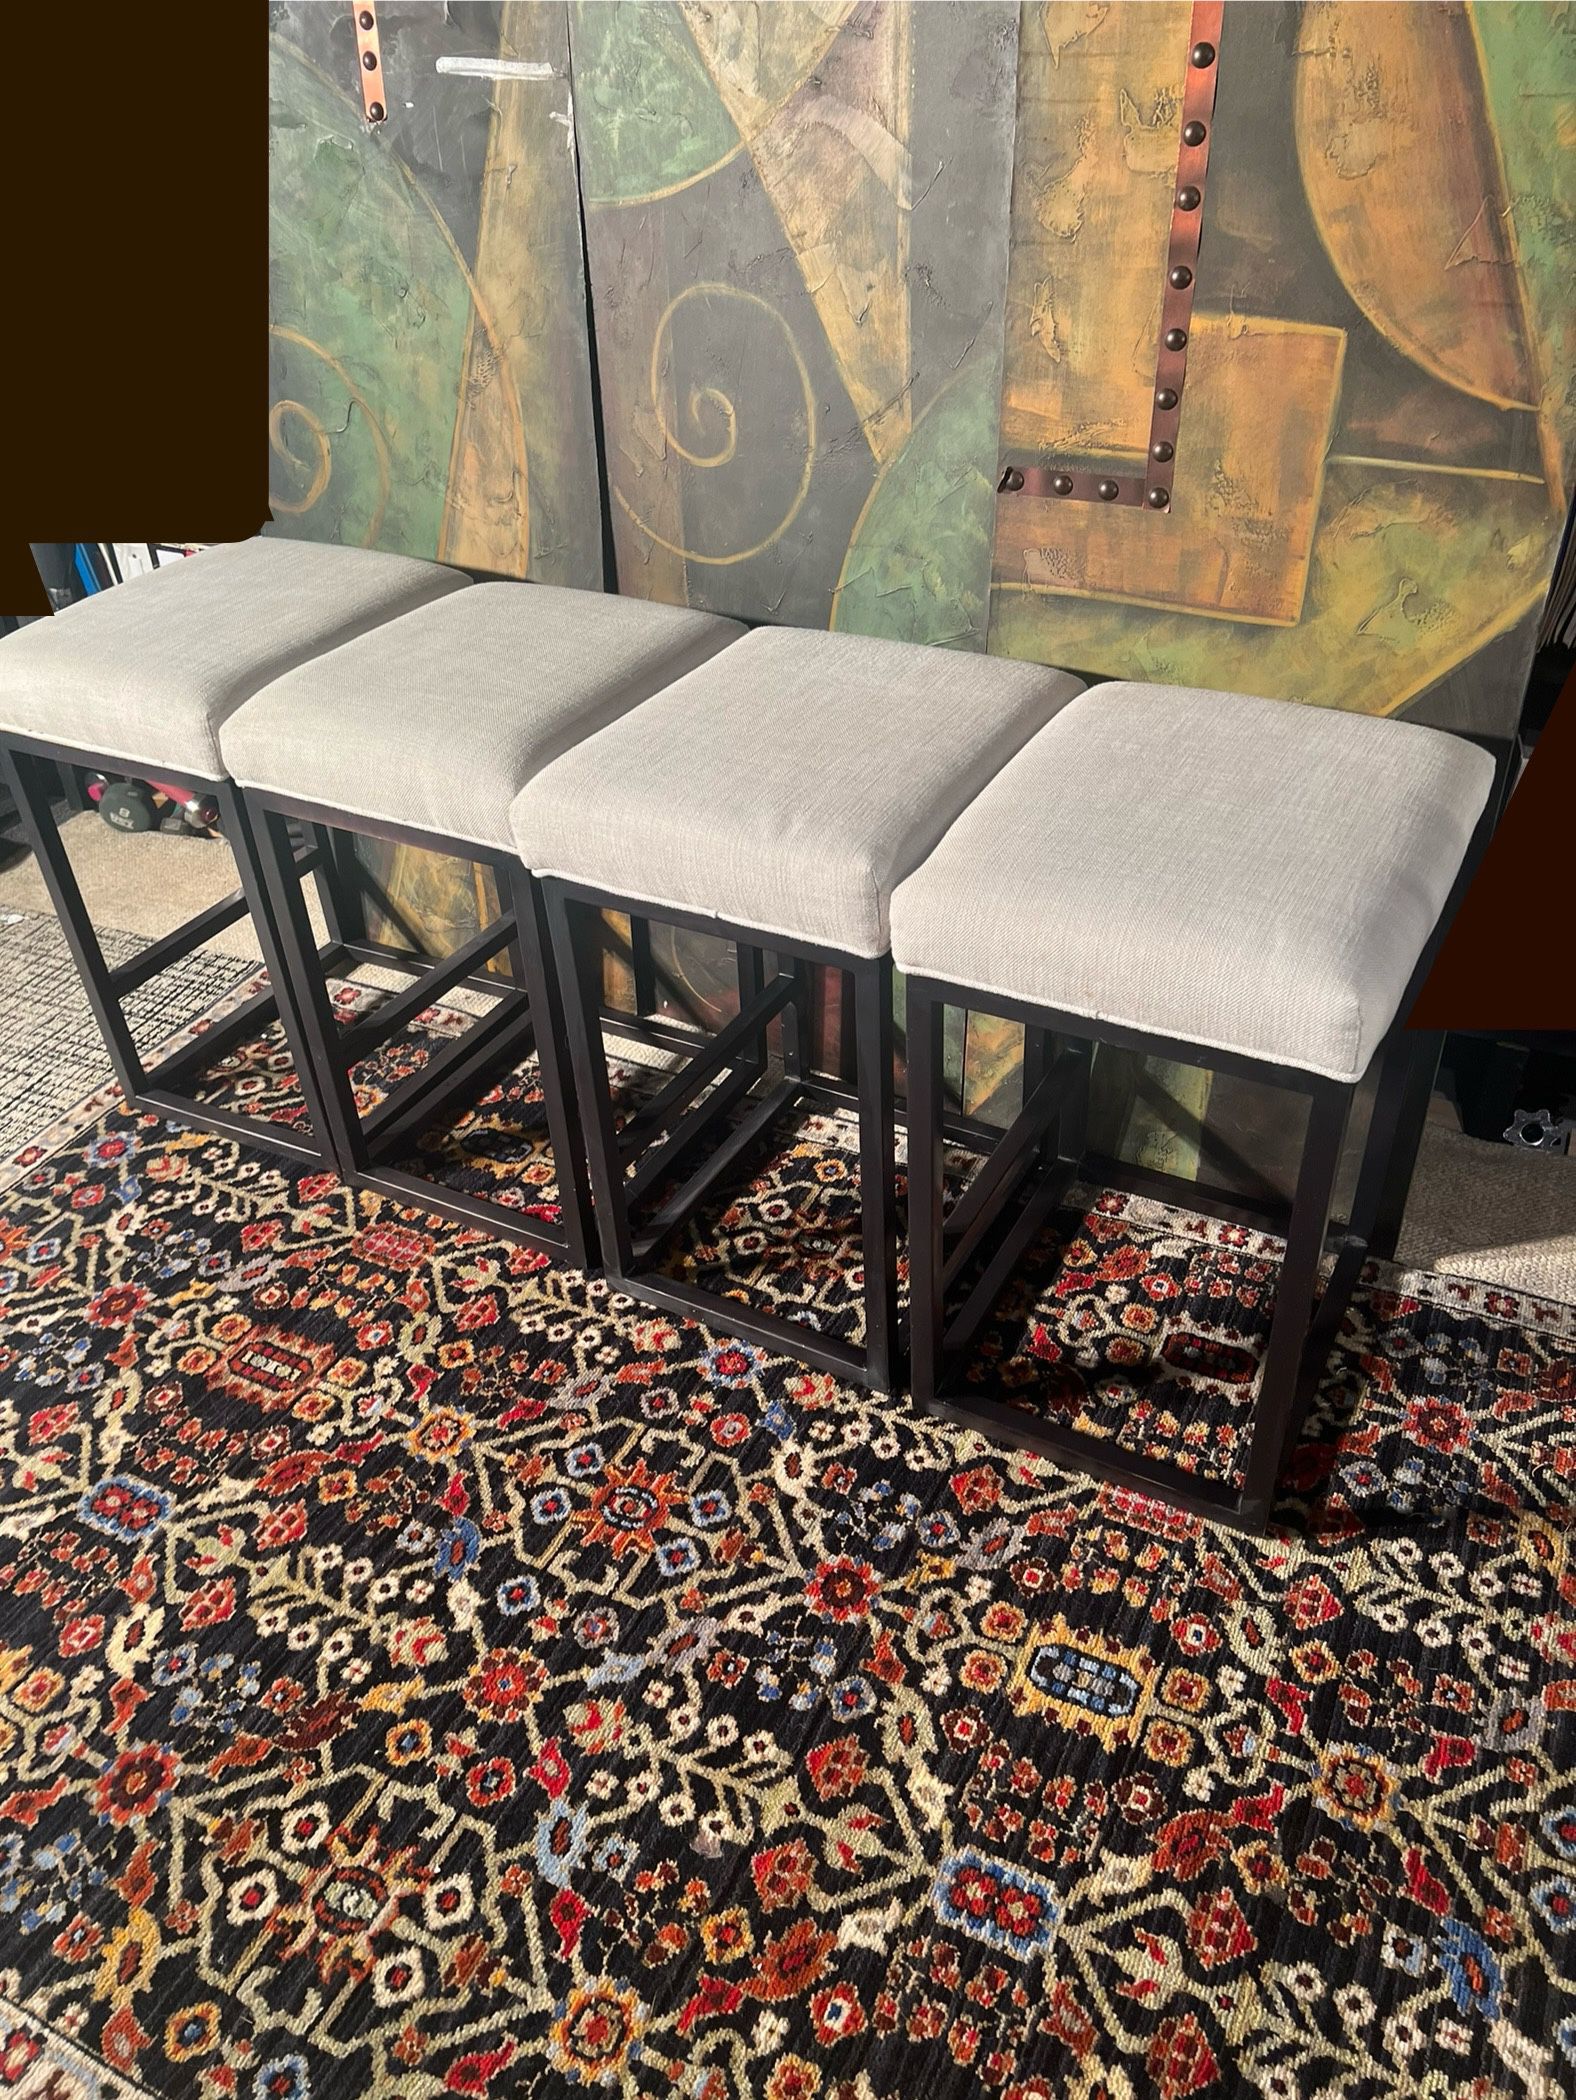 Restoration Hardware Reese Counter Stools RH Barstool backless Retails +1k each Asking $200 each 4 Available/ selling 4 or 2 / 18 W x 16 D x 25 H 